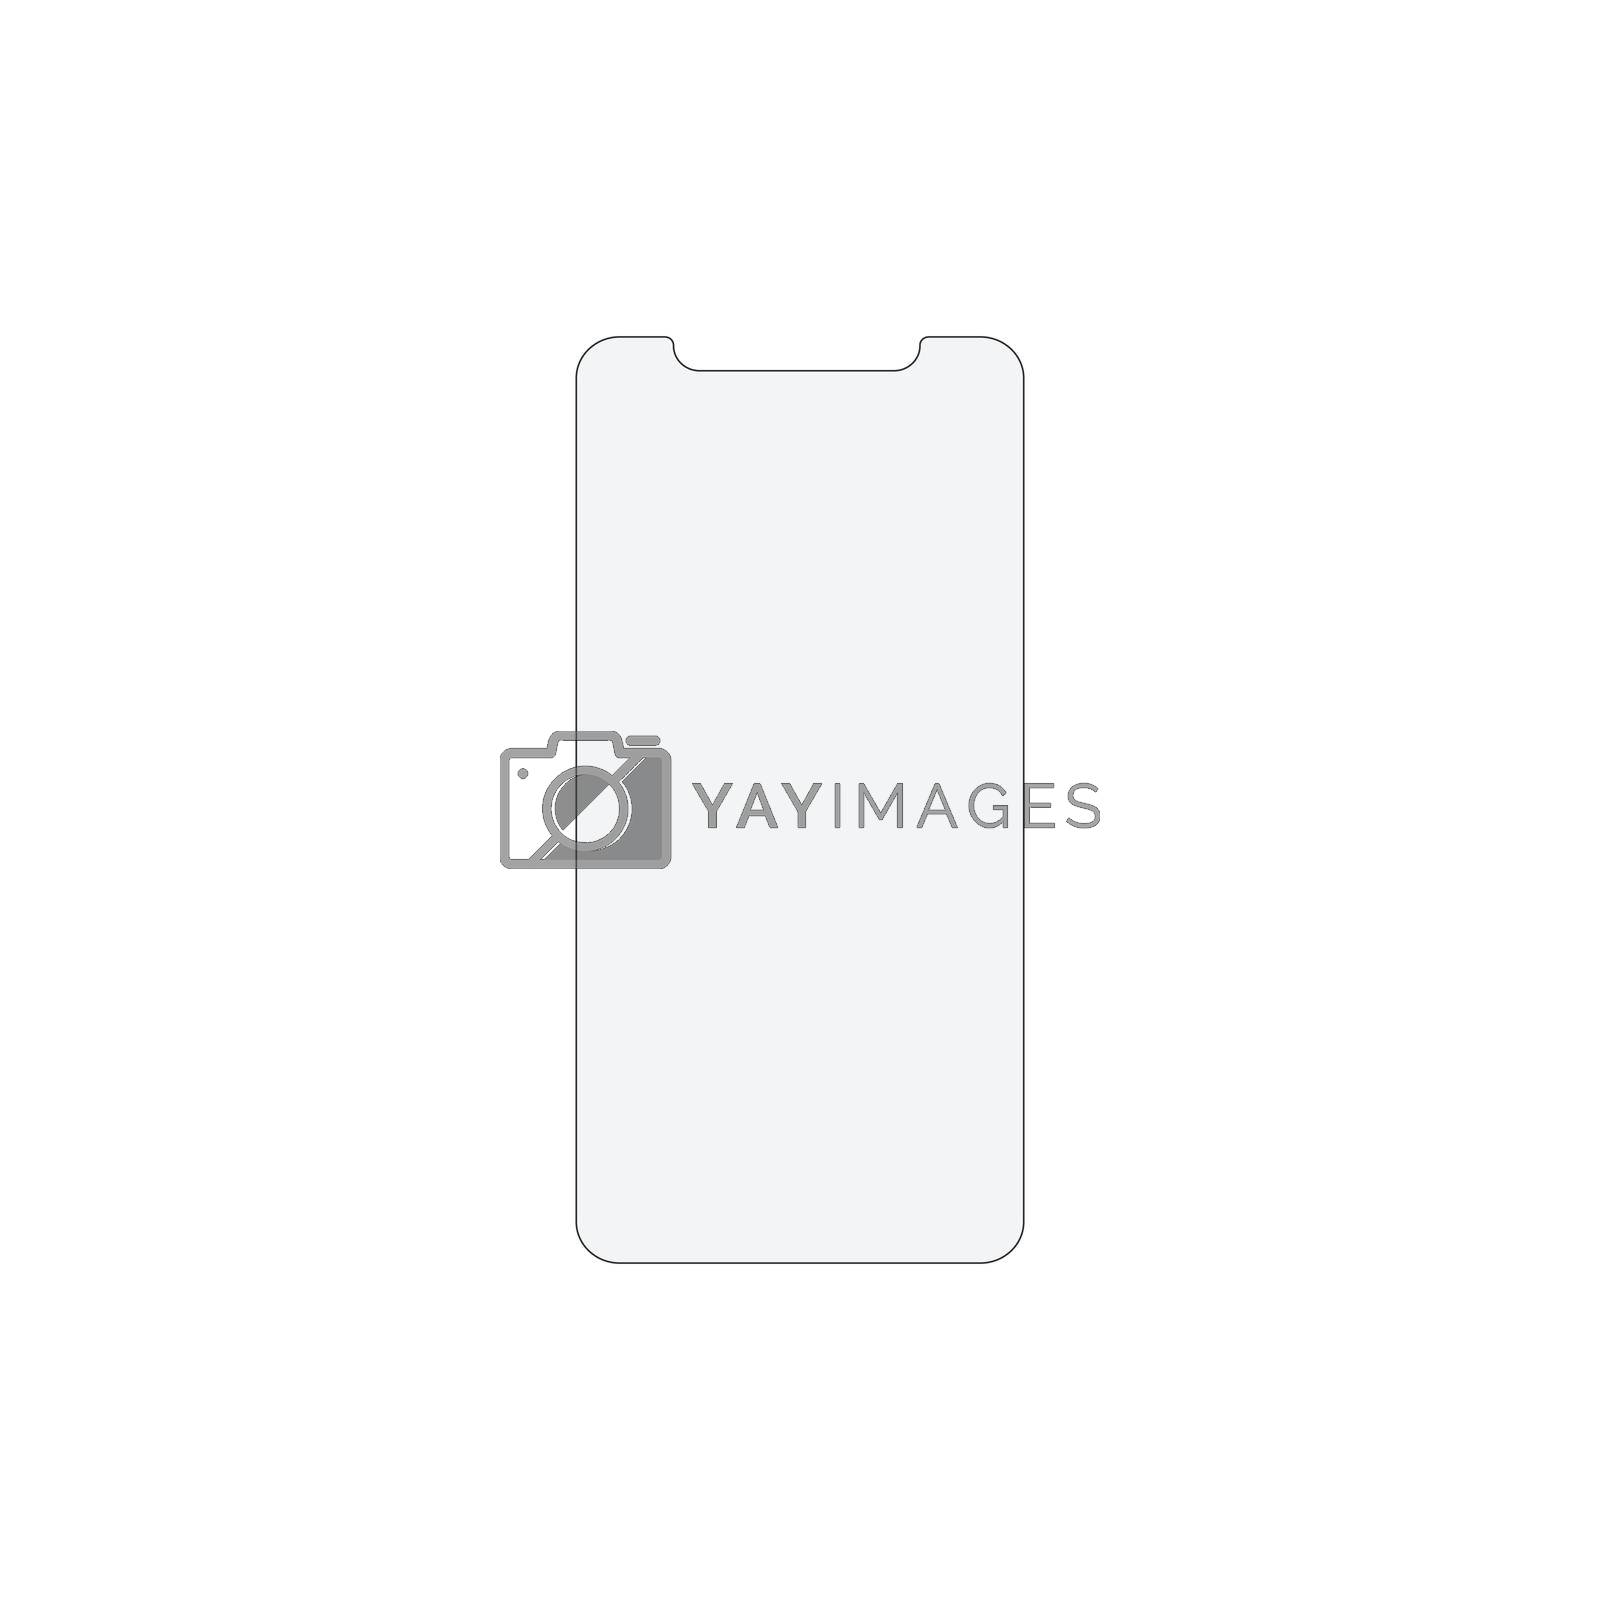 Royalty free image of Tempered glass or film screen protector. Stock Vector illustration isolated on white background. by Kyrylov